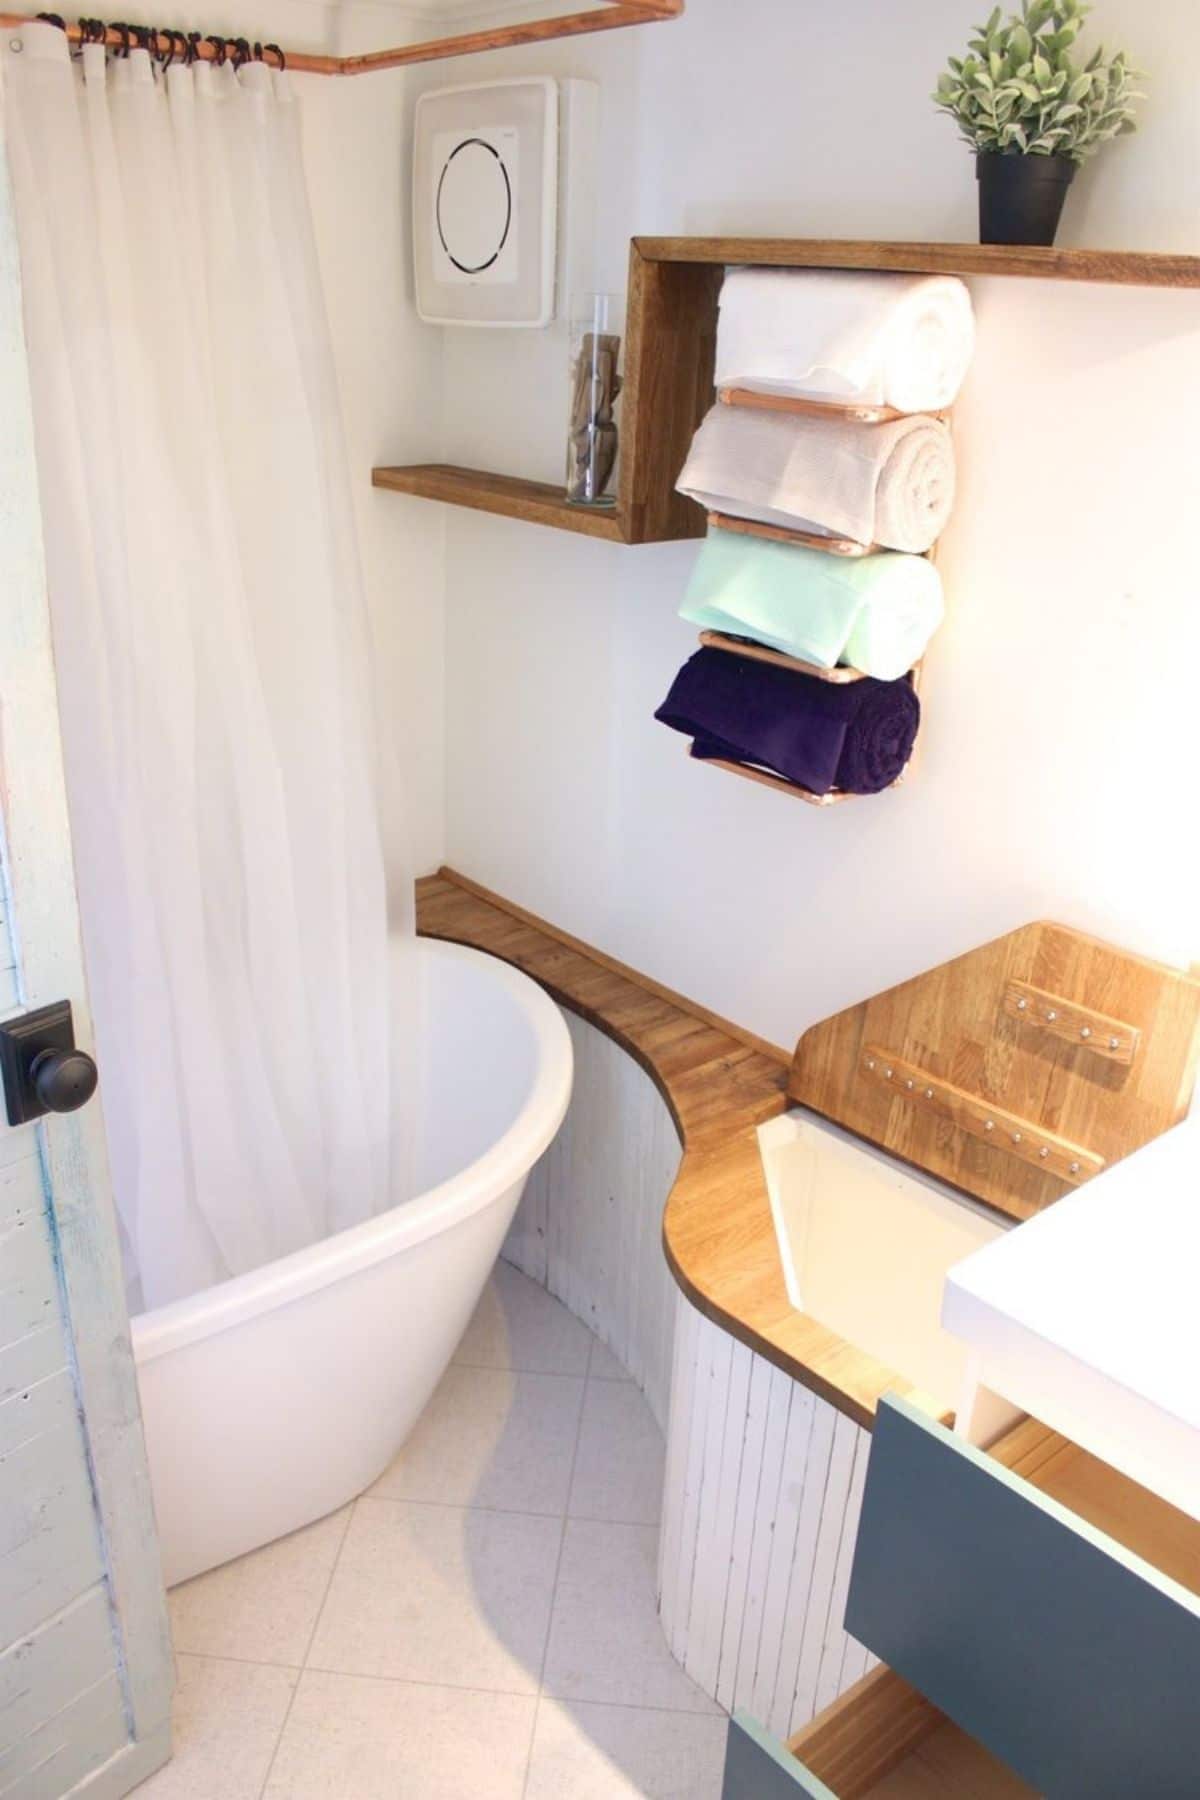 Bathtub next to bench with wooden top